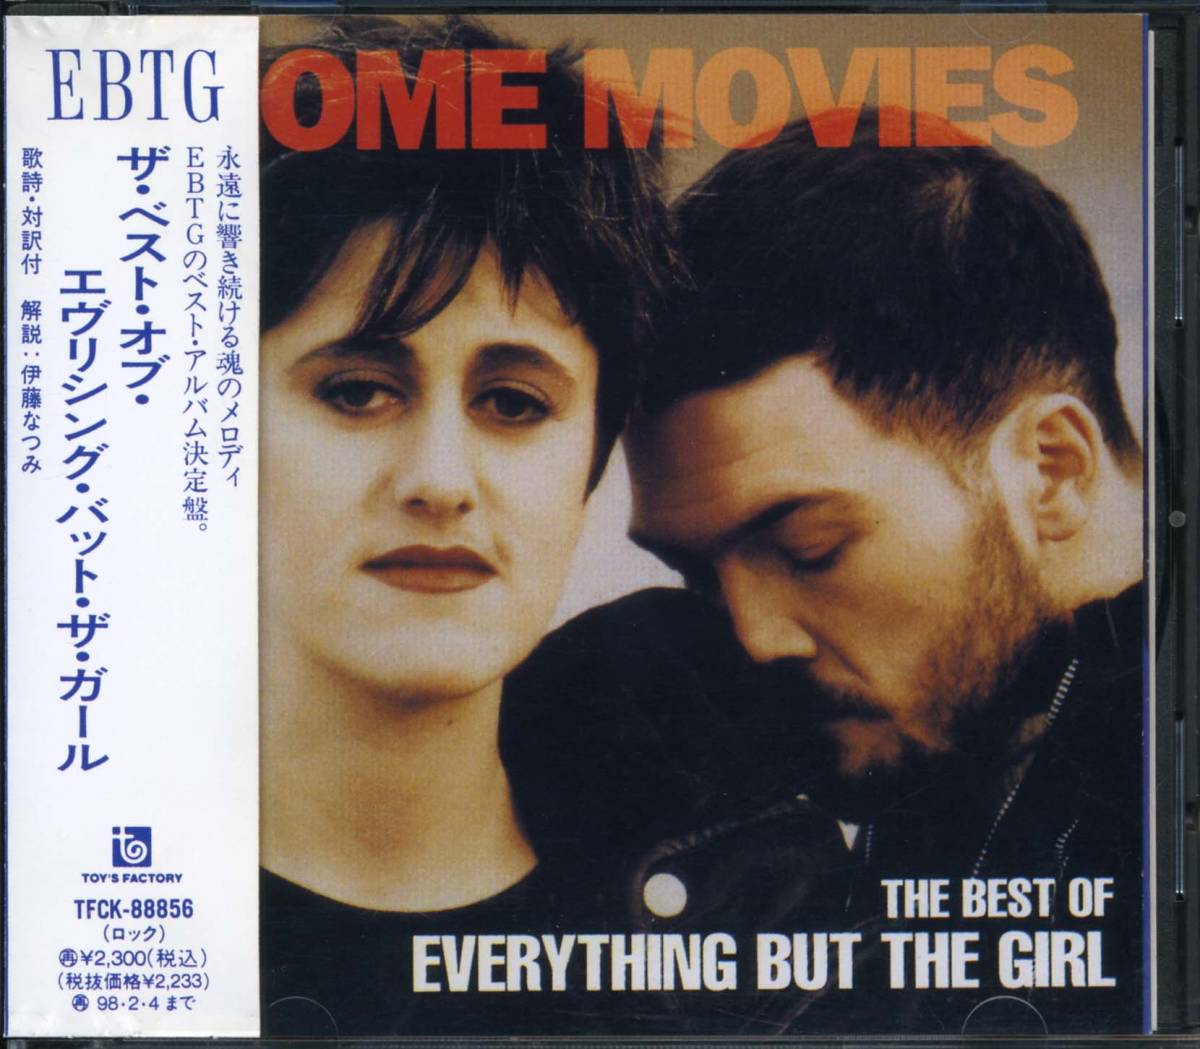 EVERYTHING BUT THE GIRL★Home Movies - The Best of Everything but the Girl [エヴリシング バット ザ ガール,Tracey Thorn]_画像1